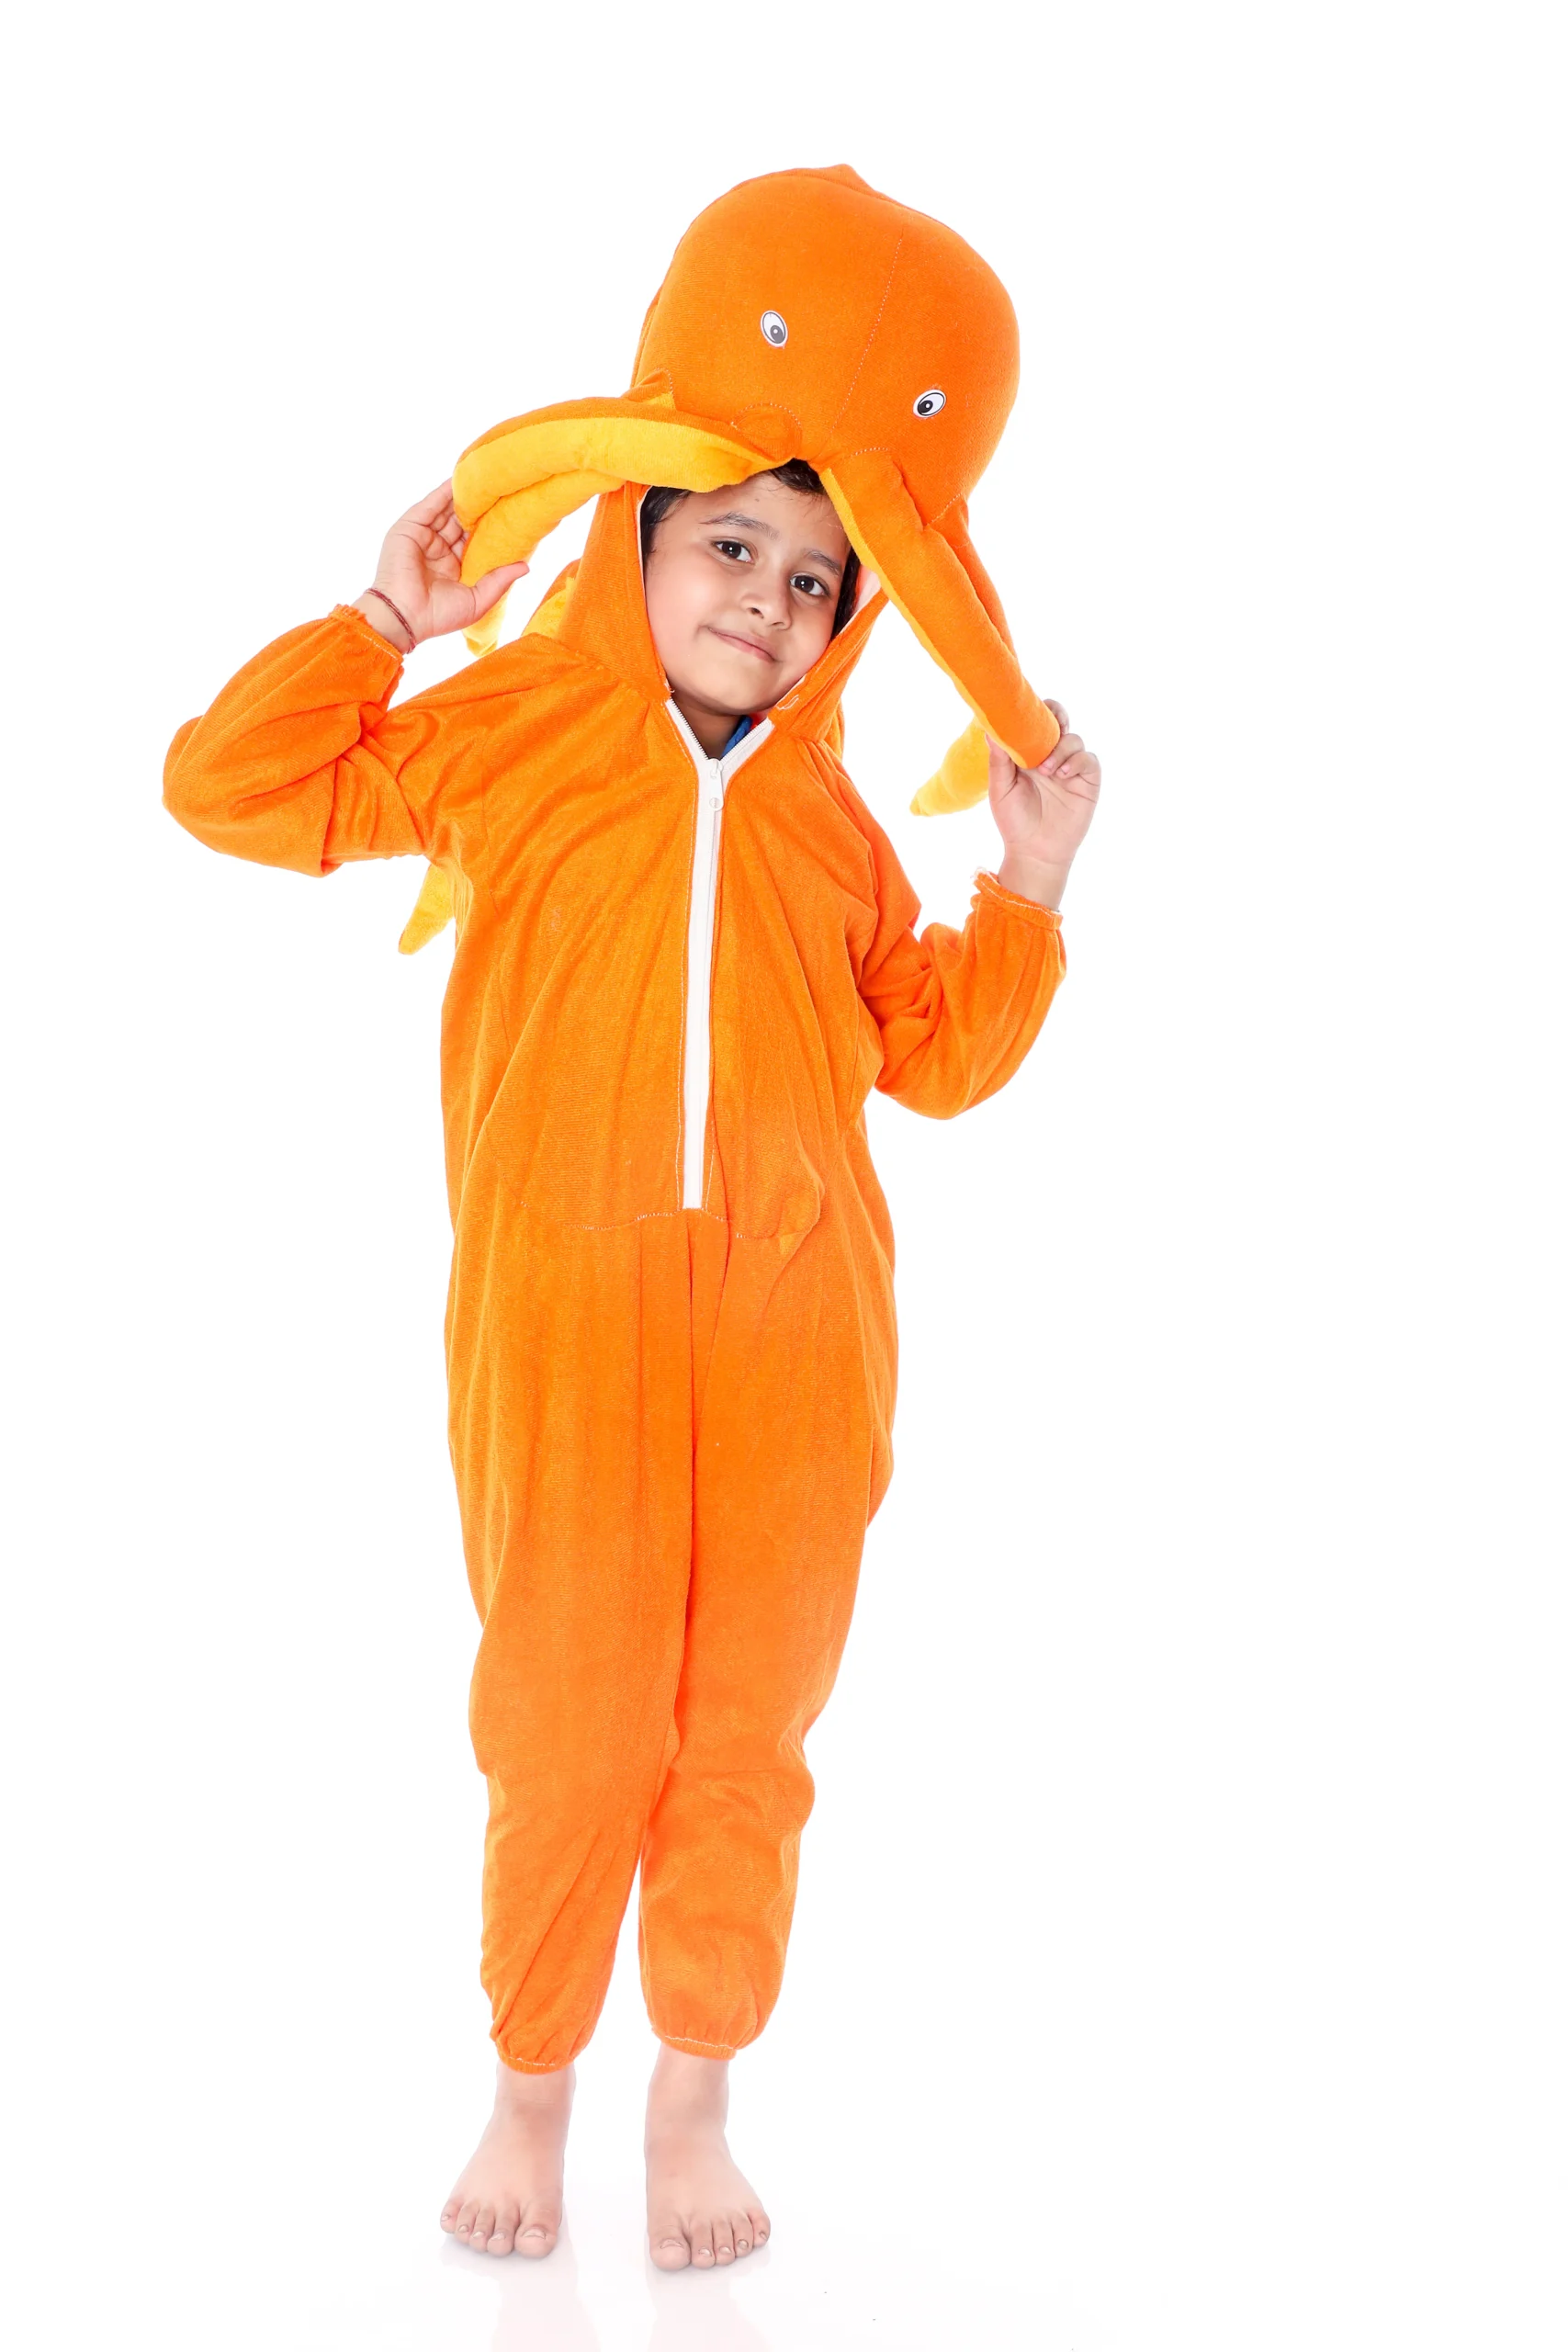 Fun and Creative Animal Costumes for Kids